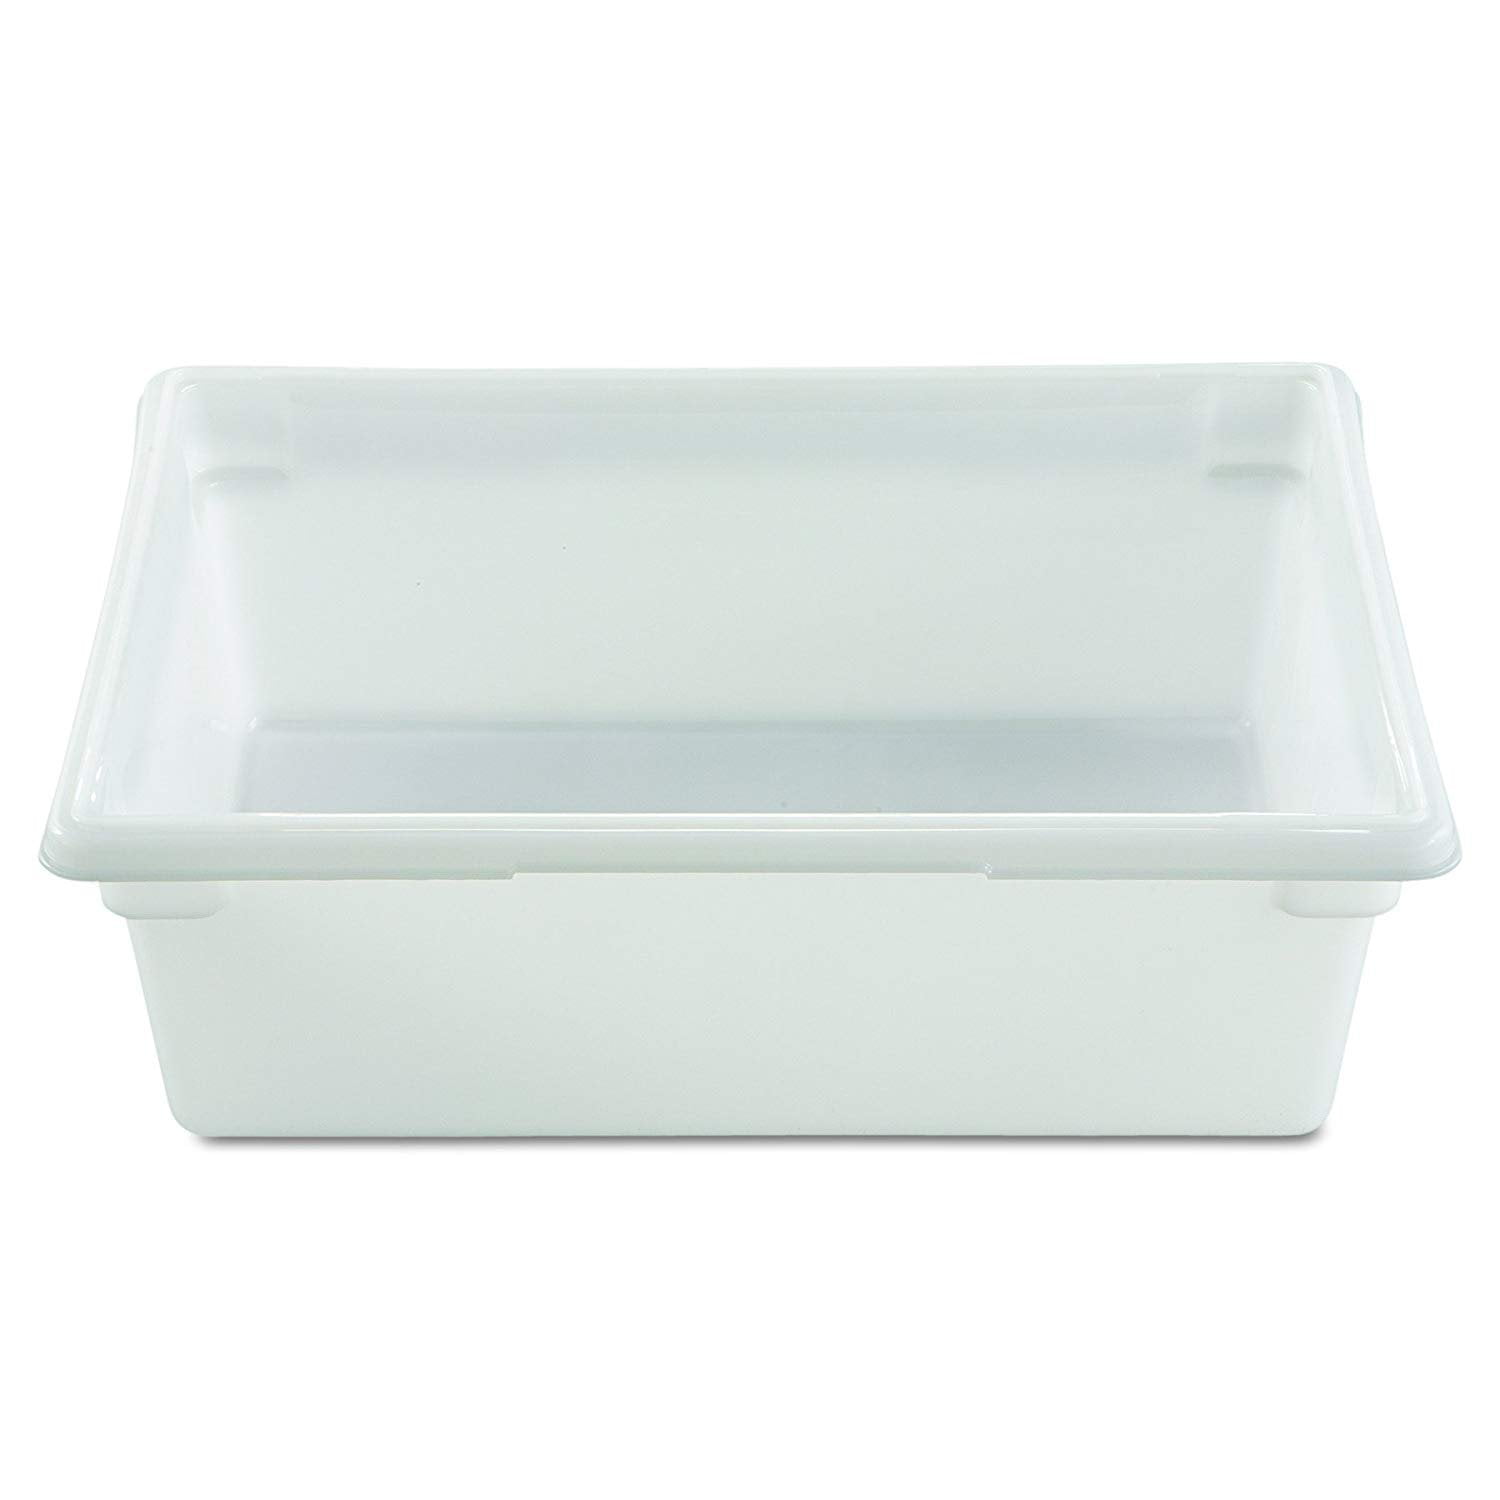 Rubbermaid Commercial Products Food Storage Box/Tote for Restaurant/Kitchen/Cafeteria,  16.5 Gallon, Clear FG332800CLR 